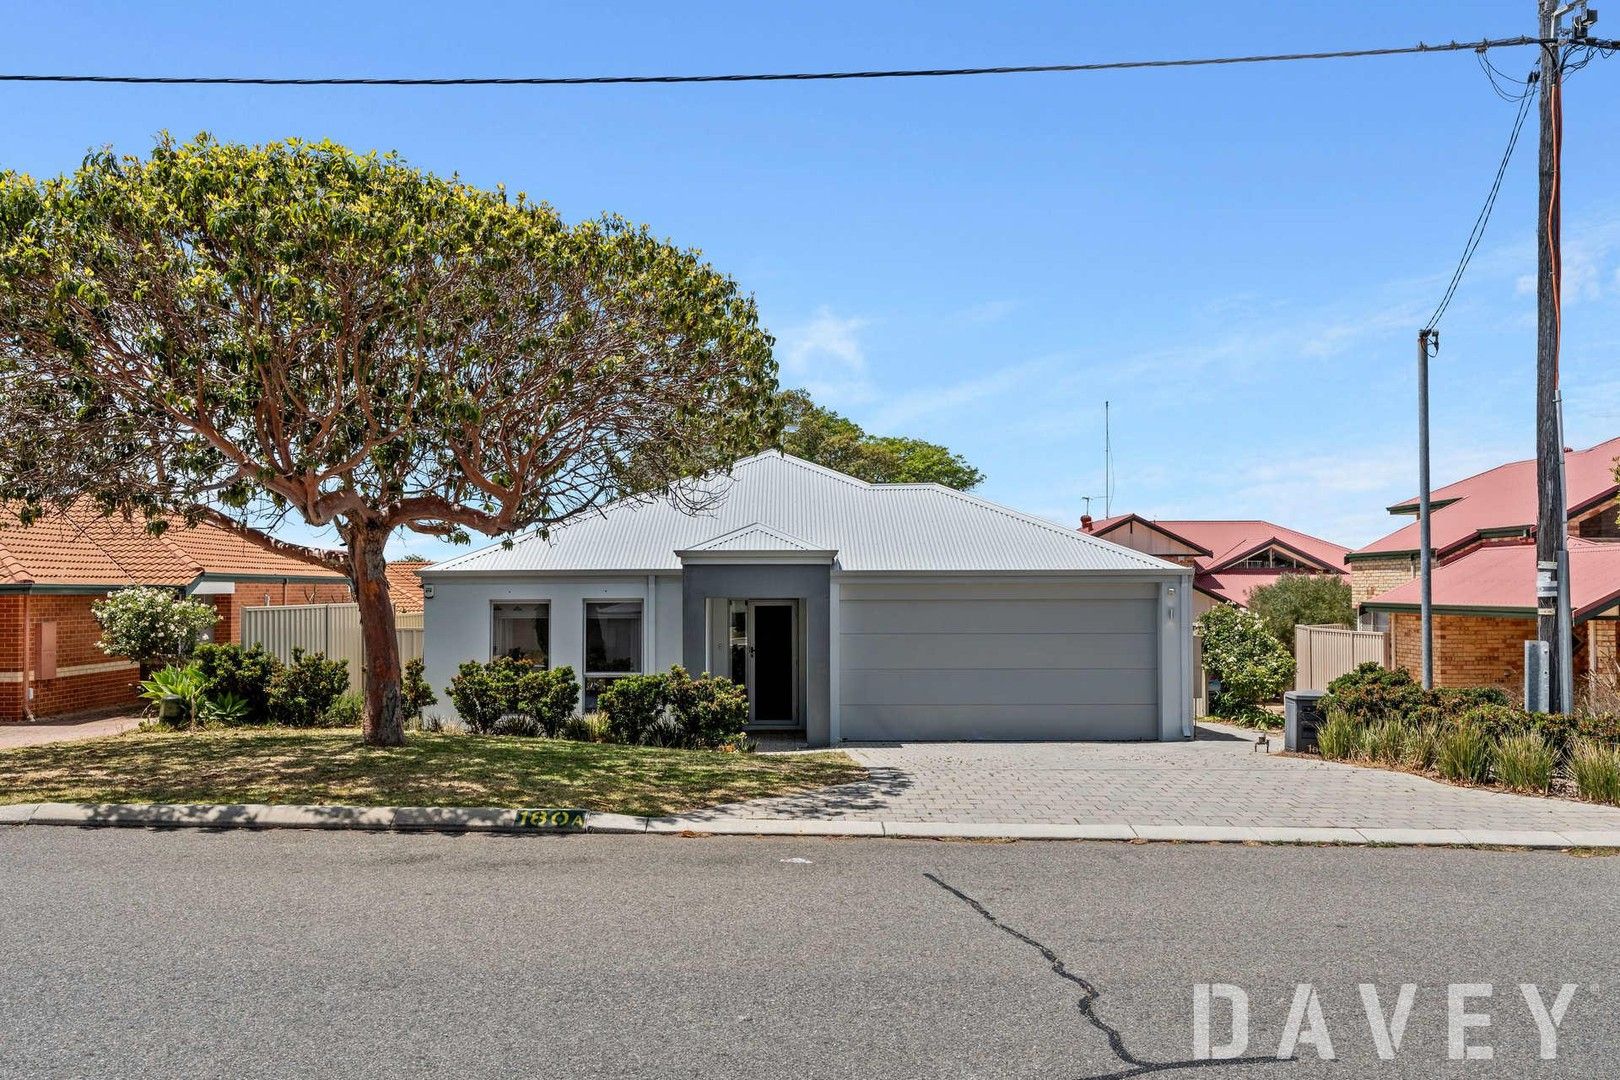 3 bedrooms Villa in 180A Wilding Street DOUBLEVIEW WA, 6018